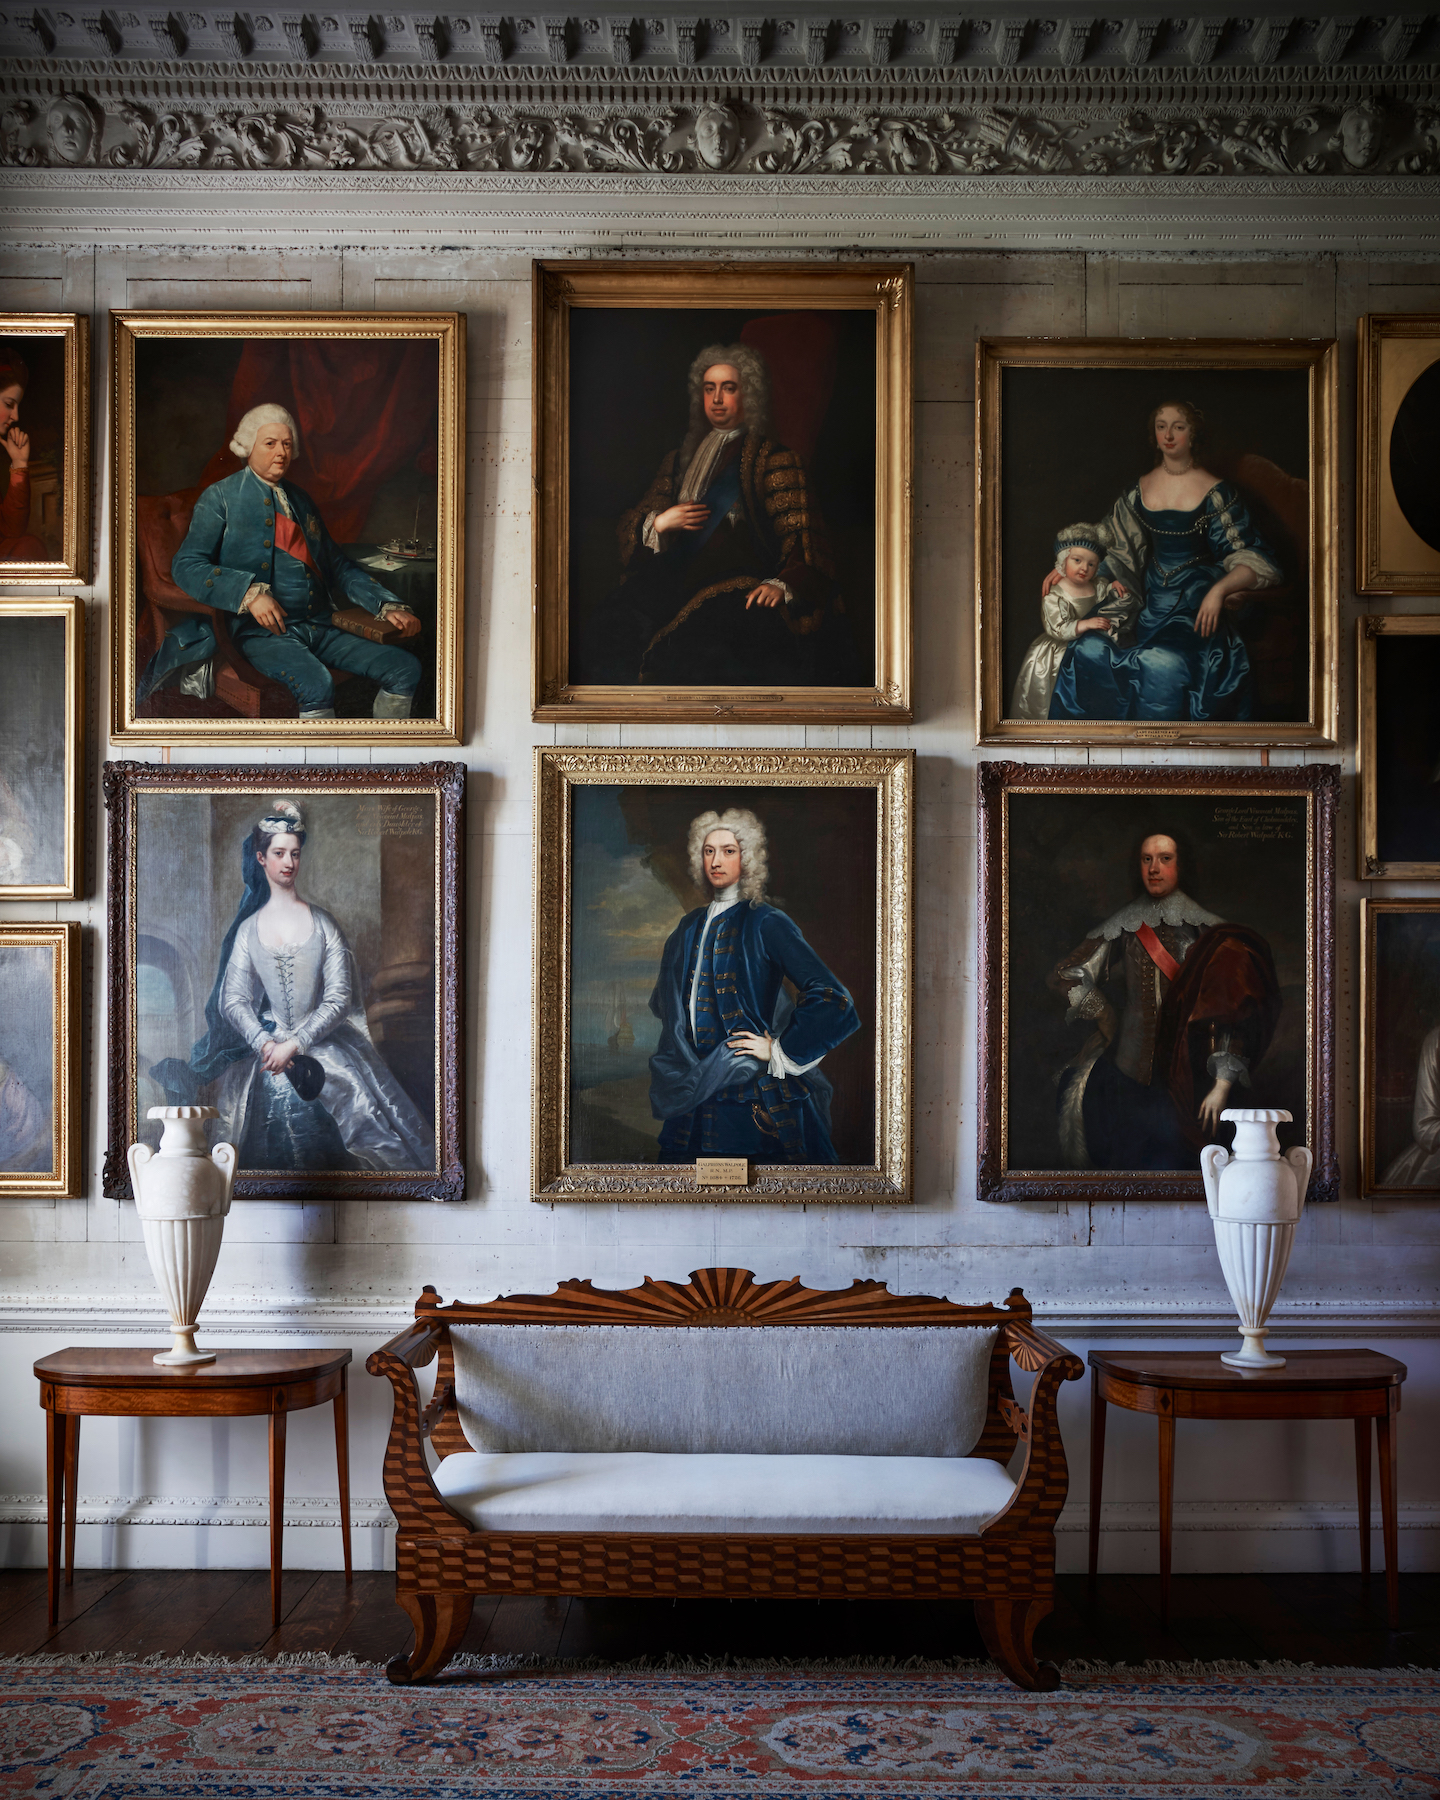 Wolterton Hall picture gallery with 35 paintings adorning the walls in Effect Magazine